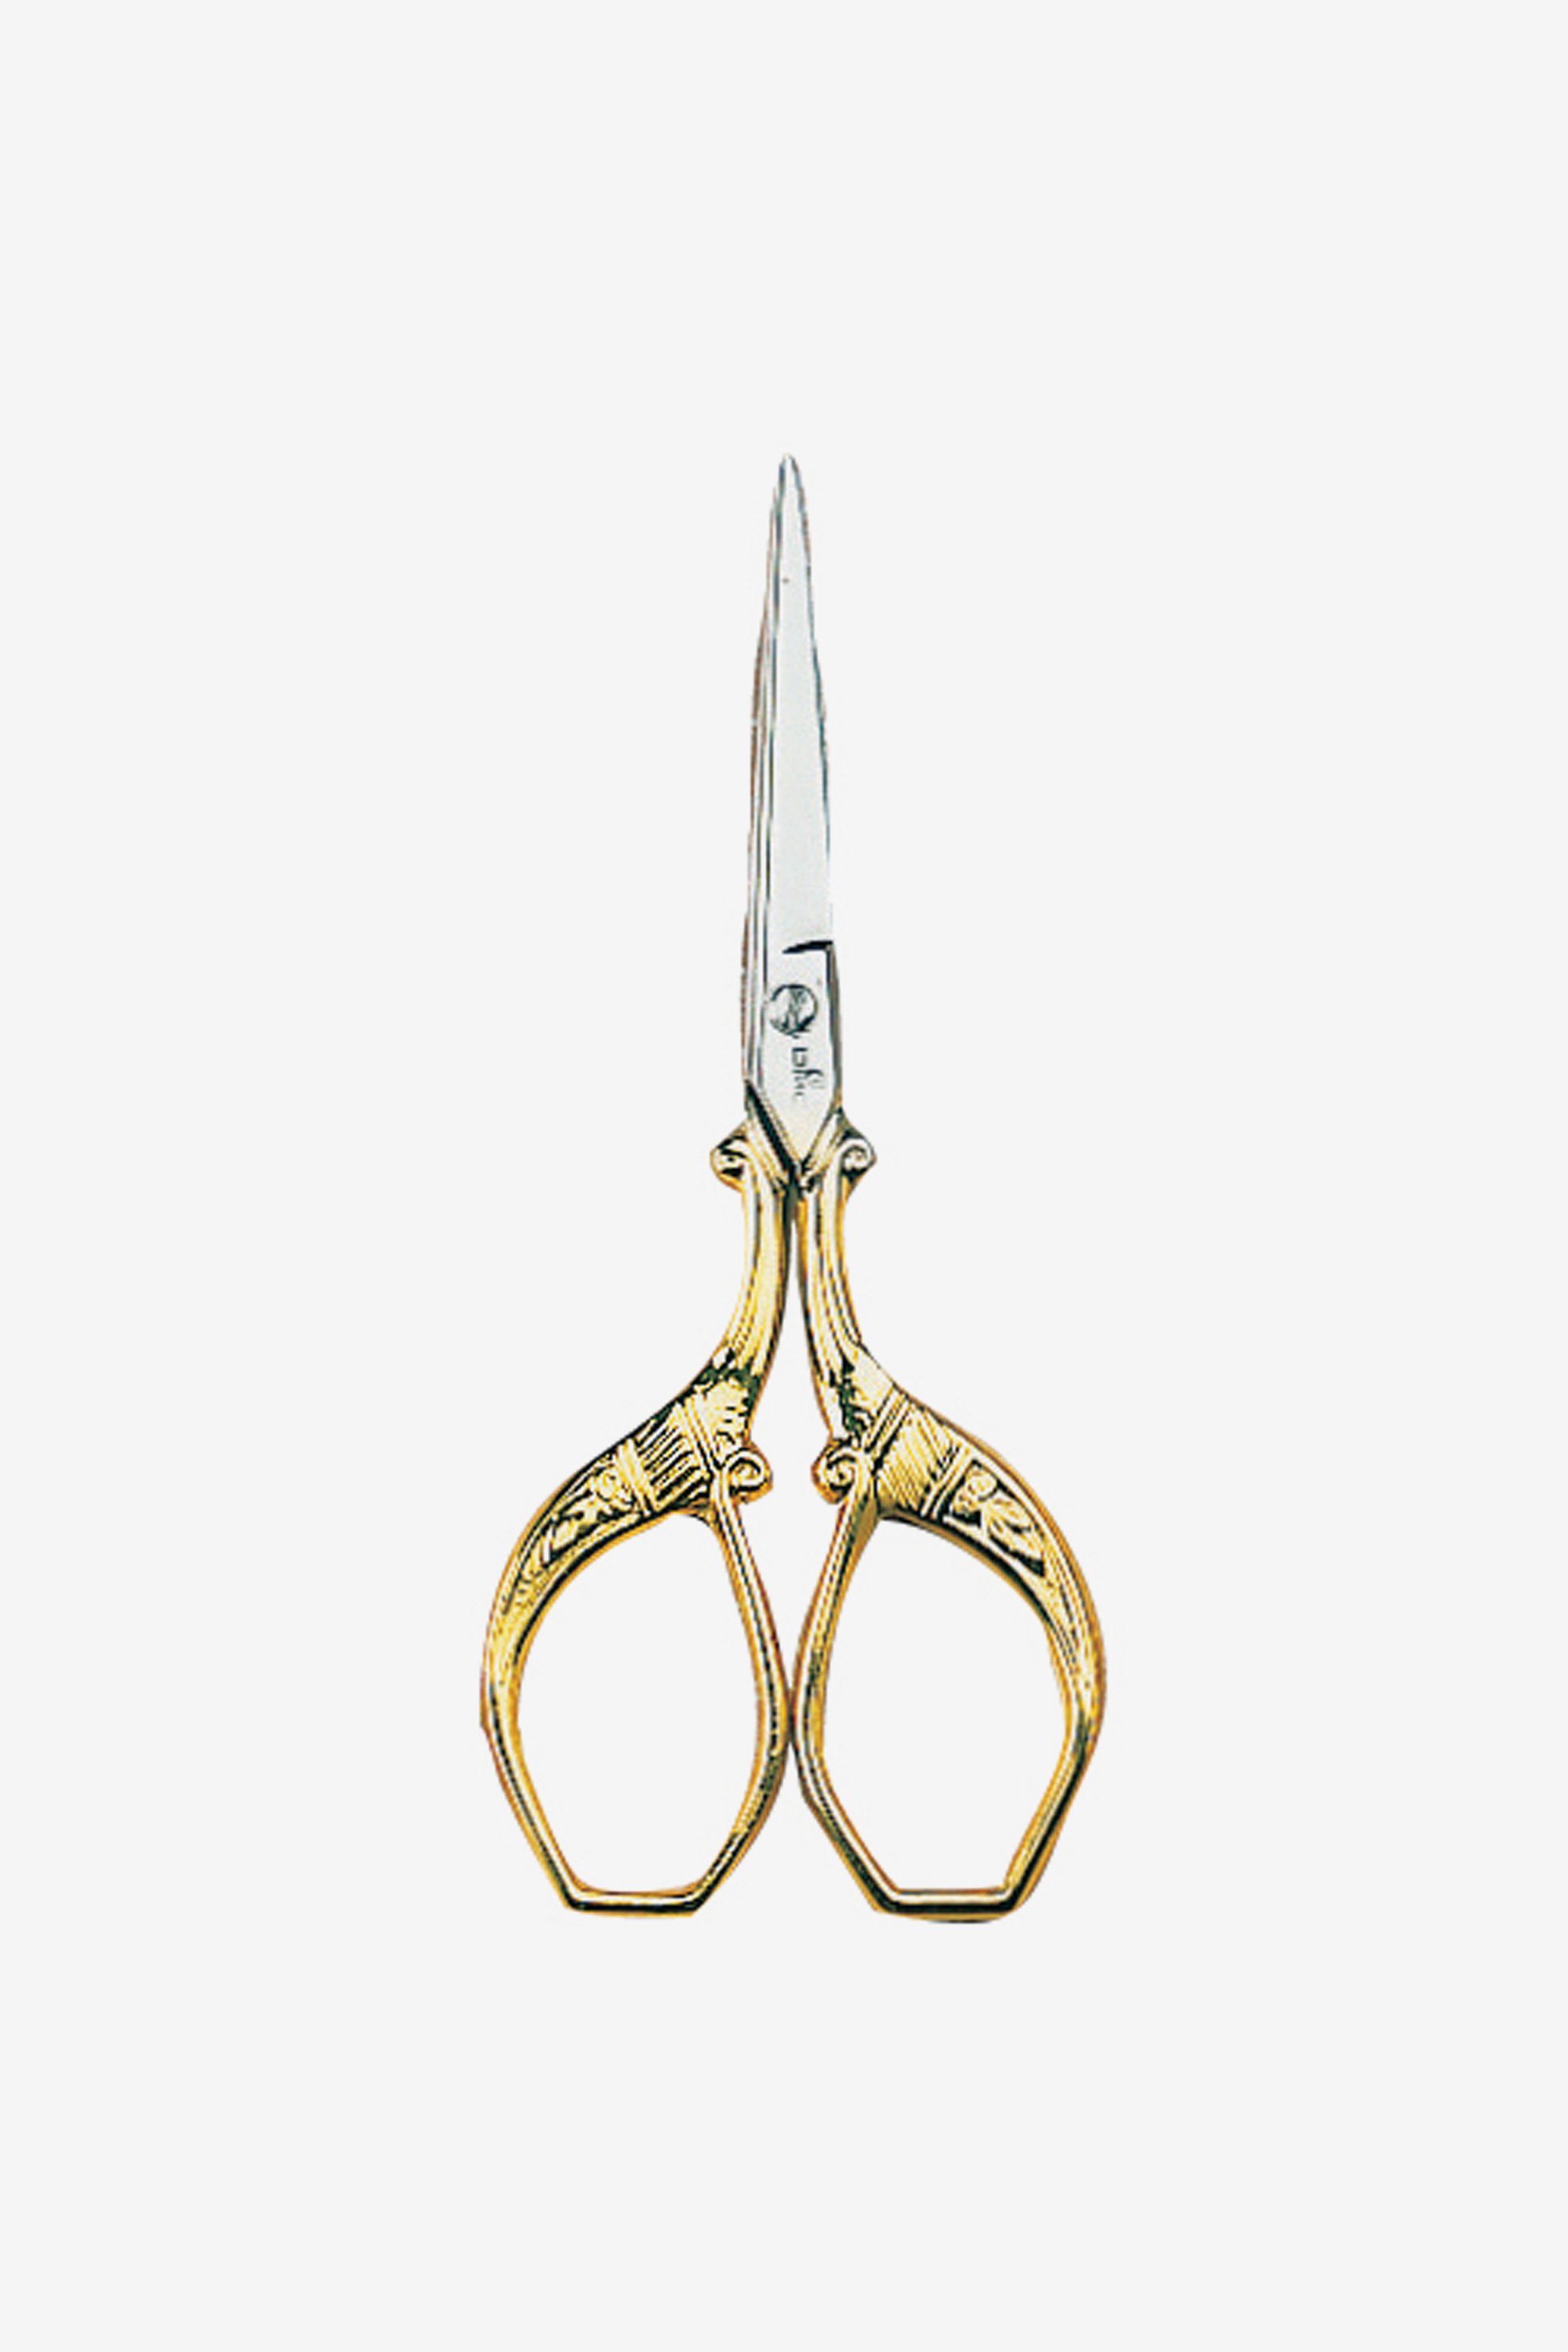 DMC Peacock Embroidery Scissors 3 3//4/" Gold plated handle Italy